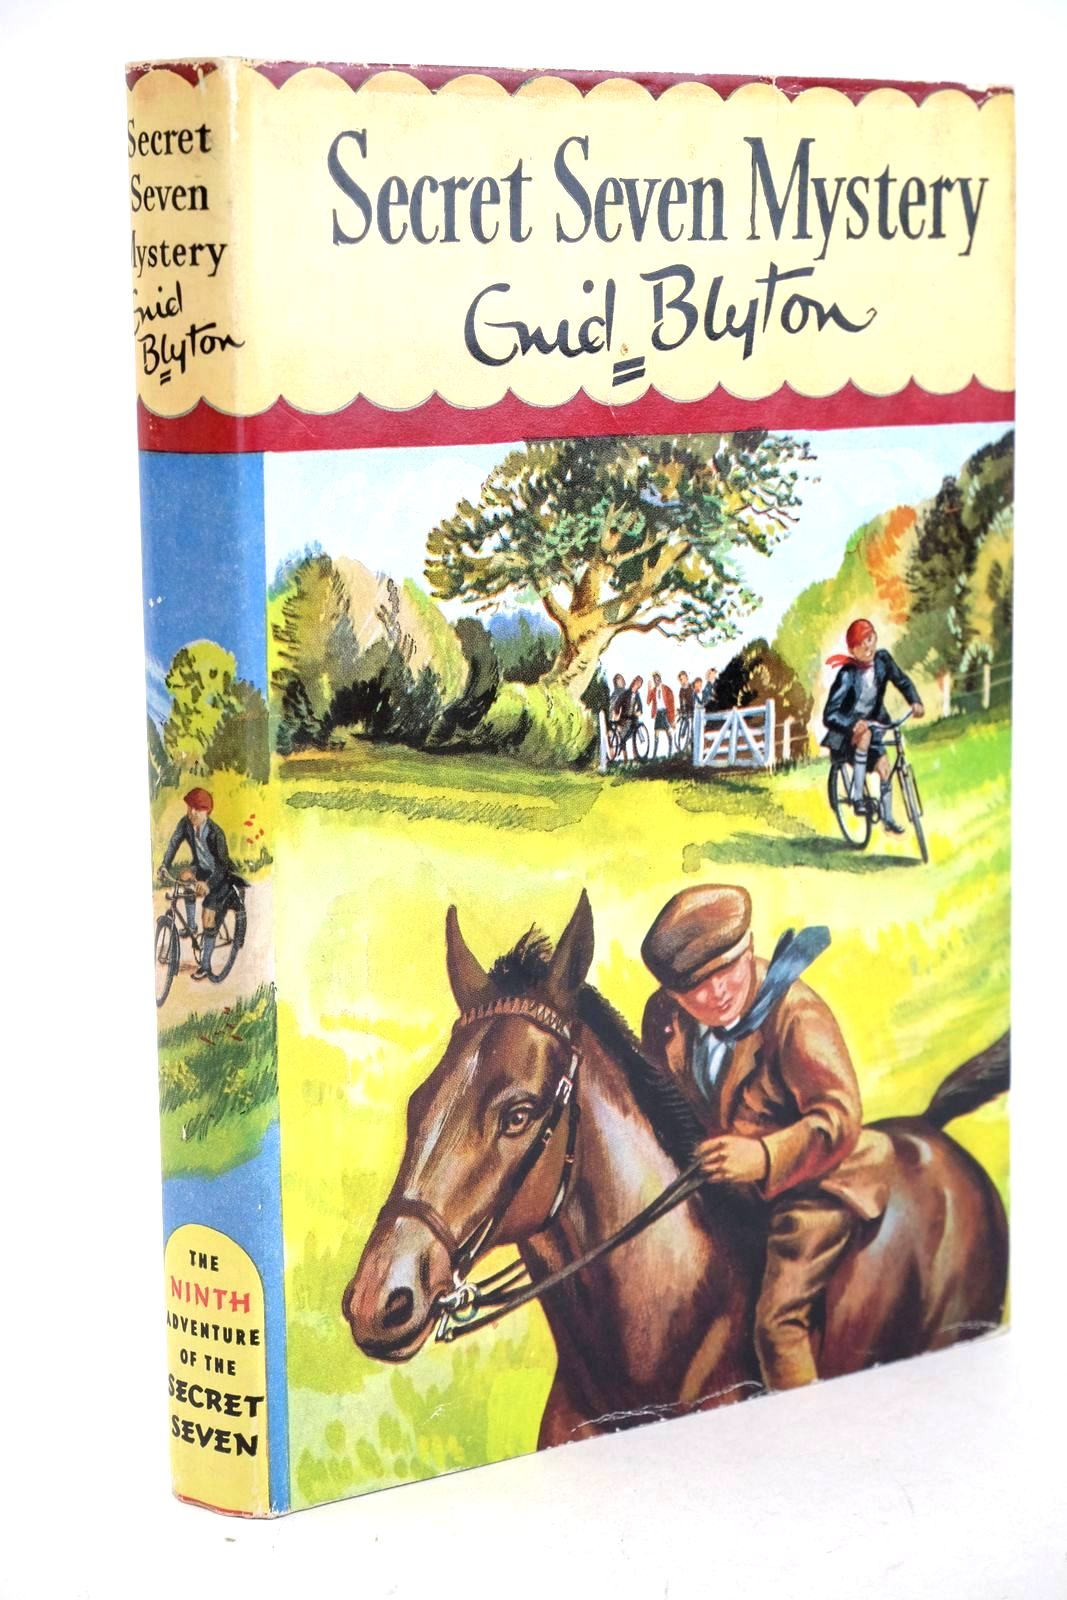 Photo of SECRET SEVEN MYSTERY written by Blyton, Enid illustrated by Sharrocks, Burgess published by Brockhampton Press (STOCK CODE: 1326866)  for sale by Stella & Rose's Books